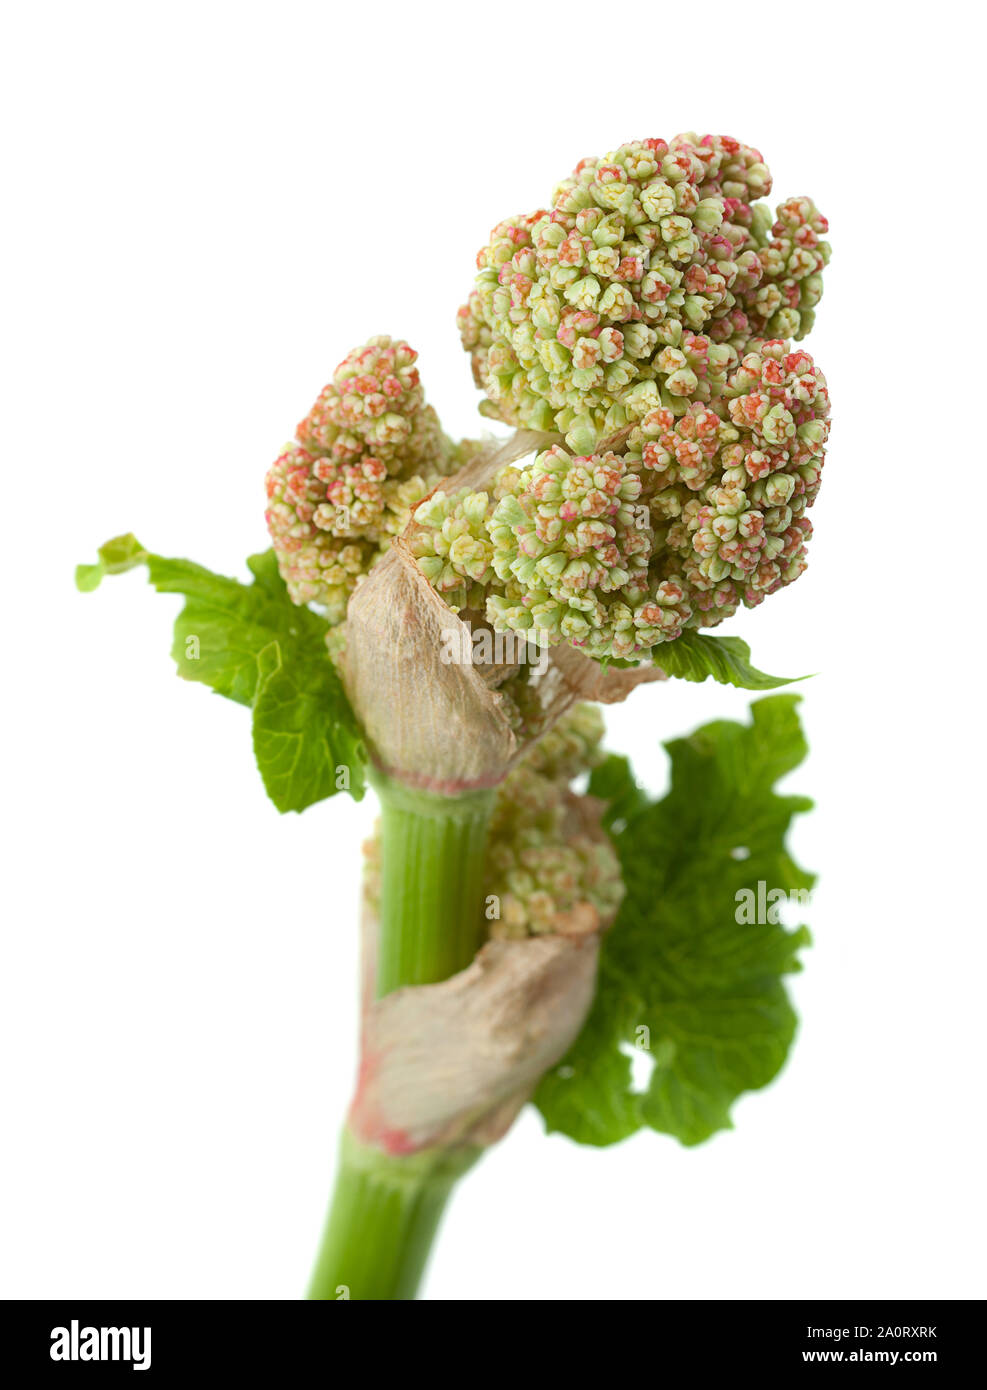 Rhubarb vegetable blossom with leaf isolated on white background Stock Photo